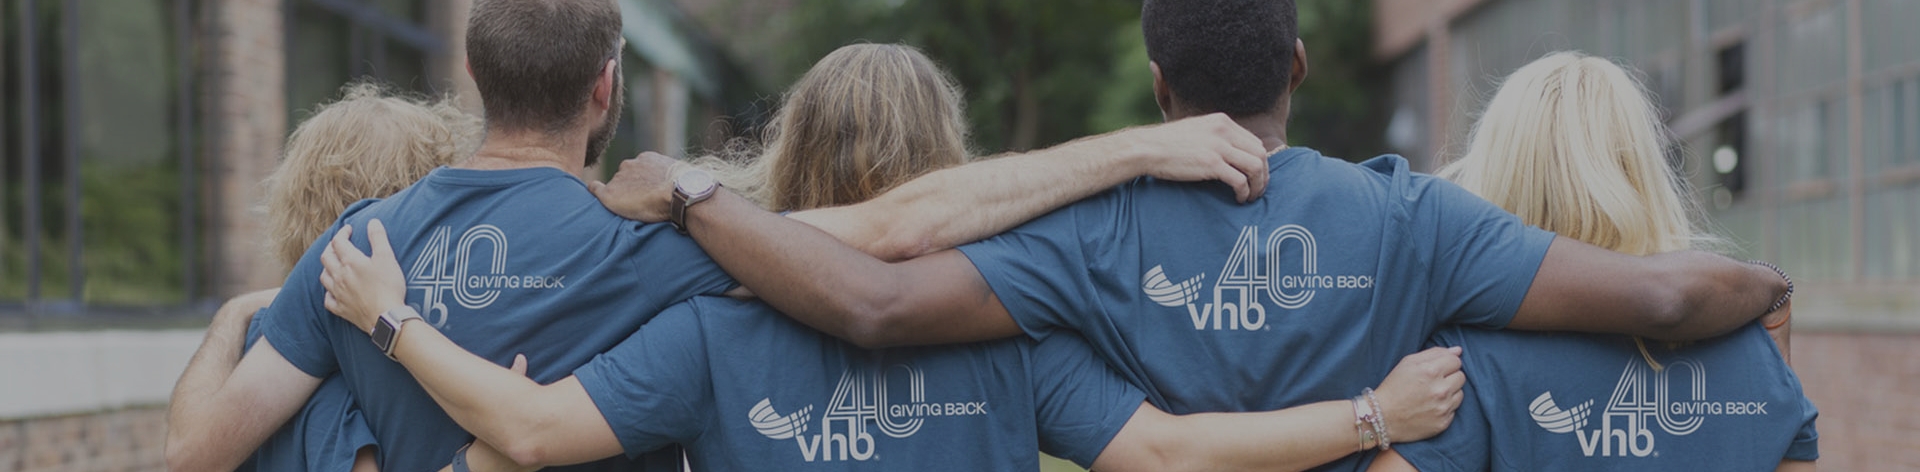 From charity events to volunteering to celebrating together, VHBers have fun.